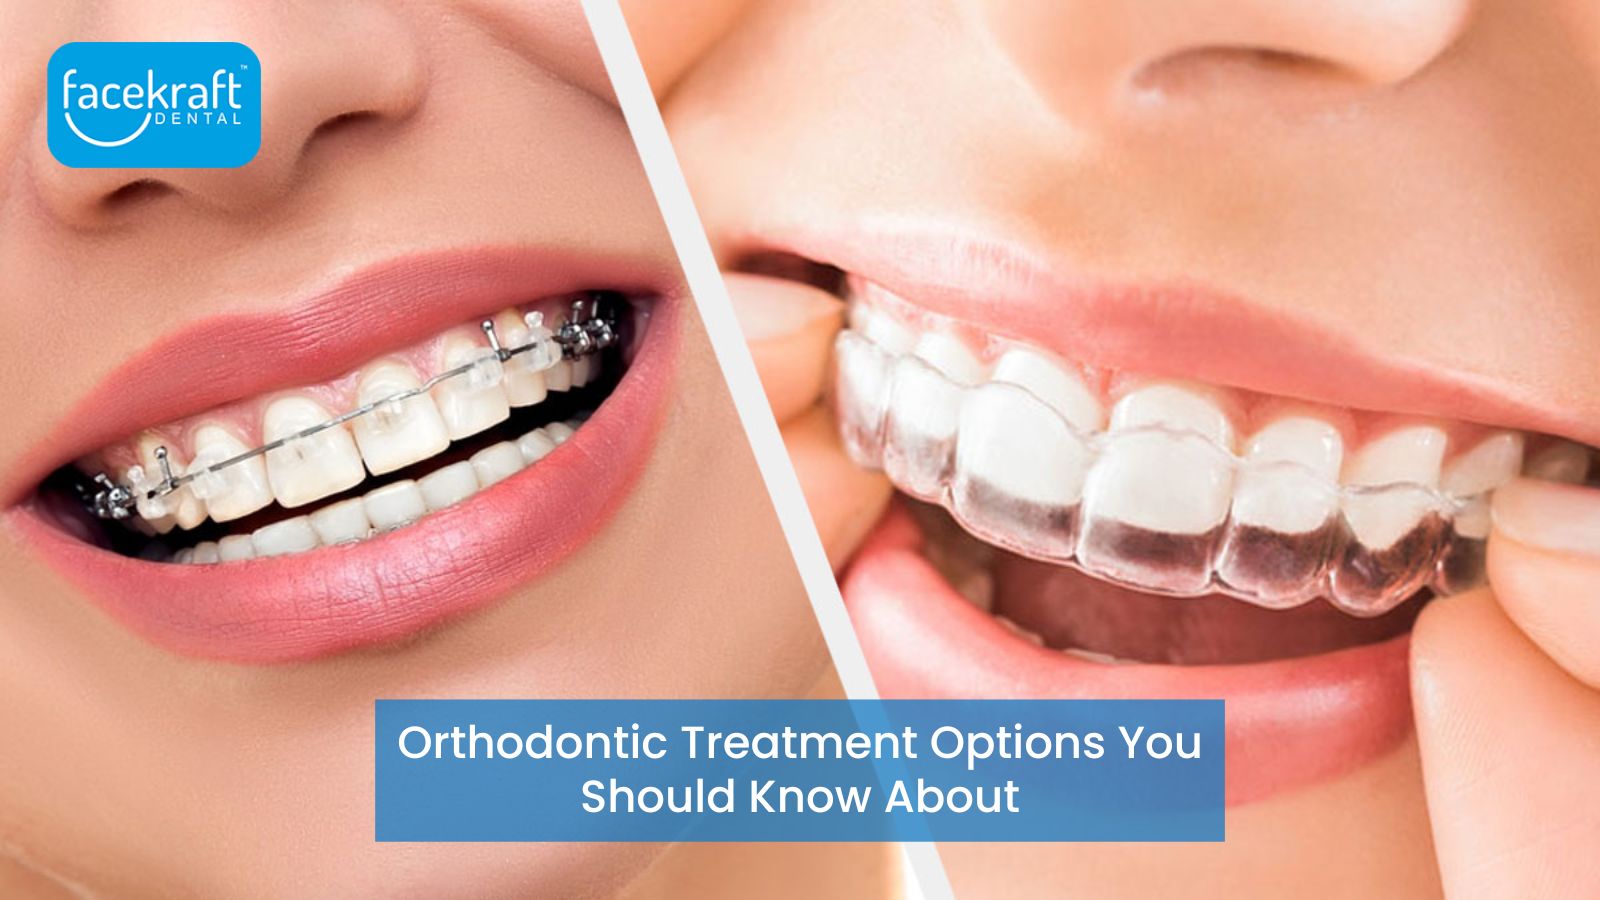 Orthodontic Treatment Options You Should Know About